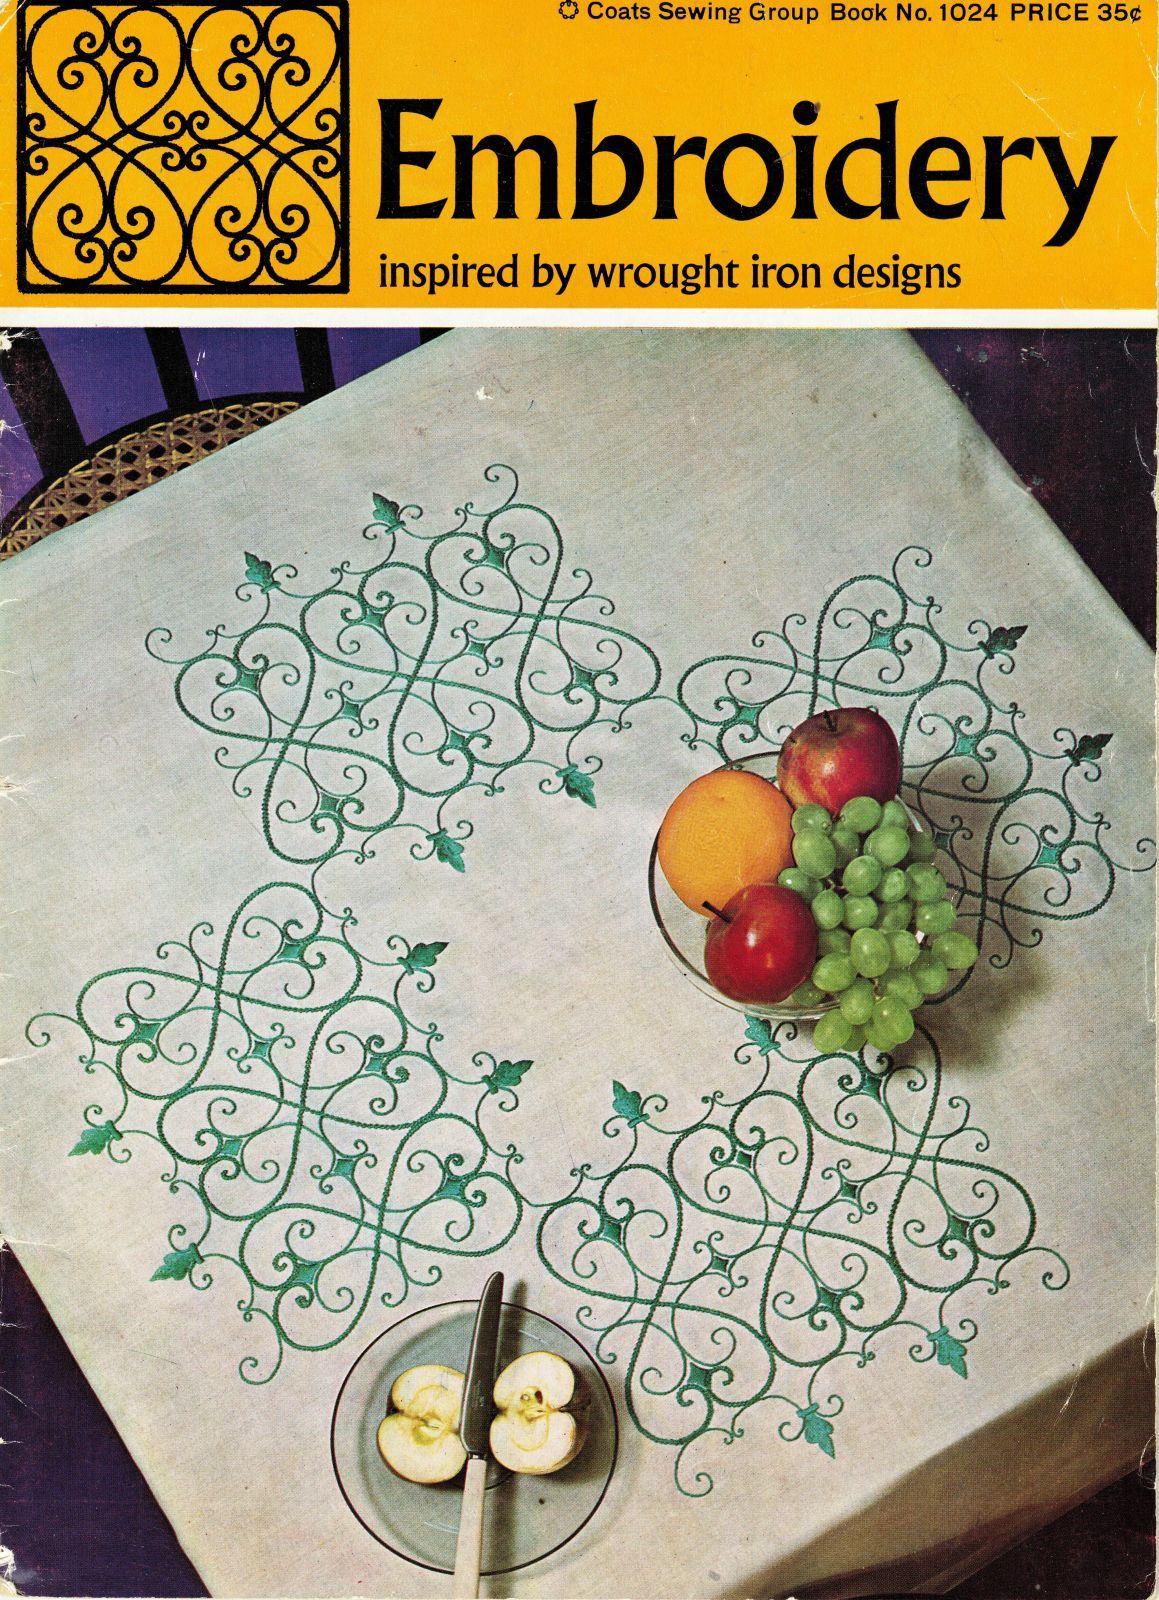 1966 Embroidery Inspired By Wrought Iron Designs Iron On Transfer Patterns Book - $13.99